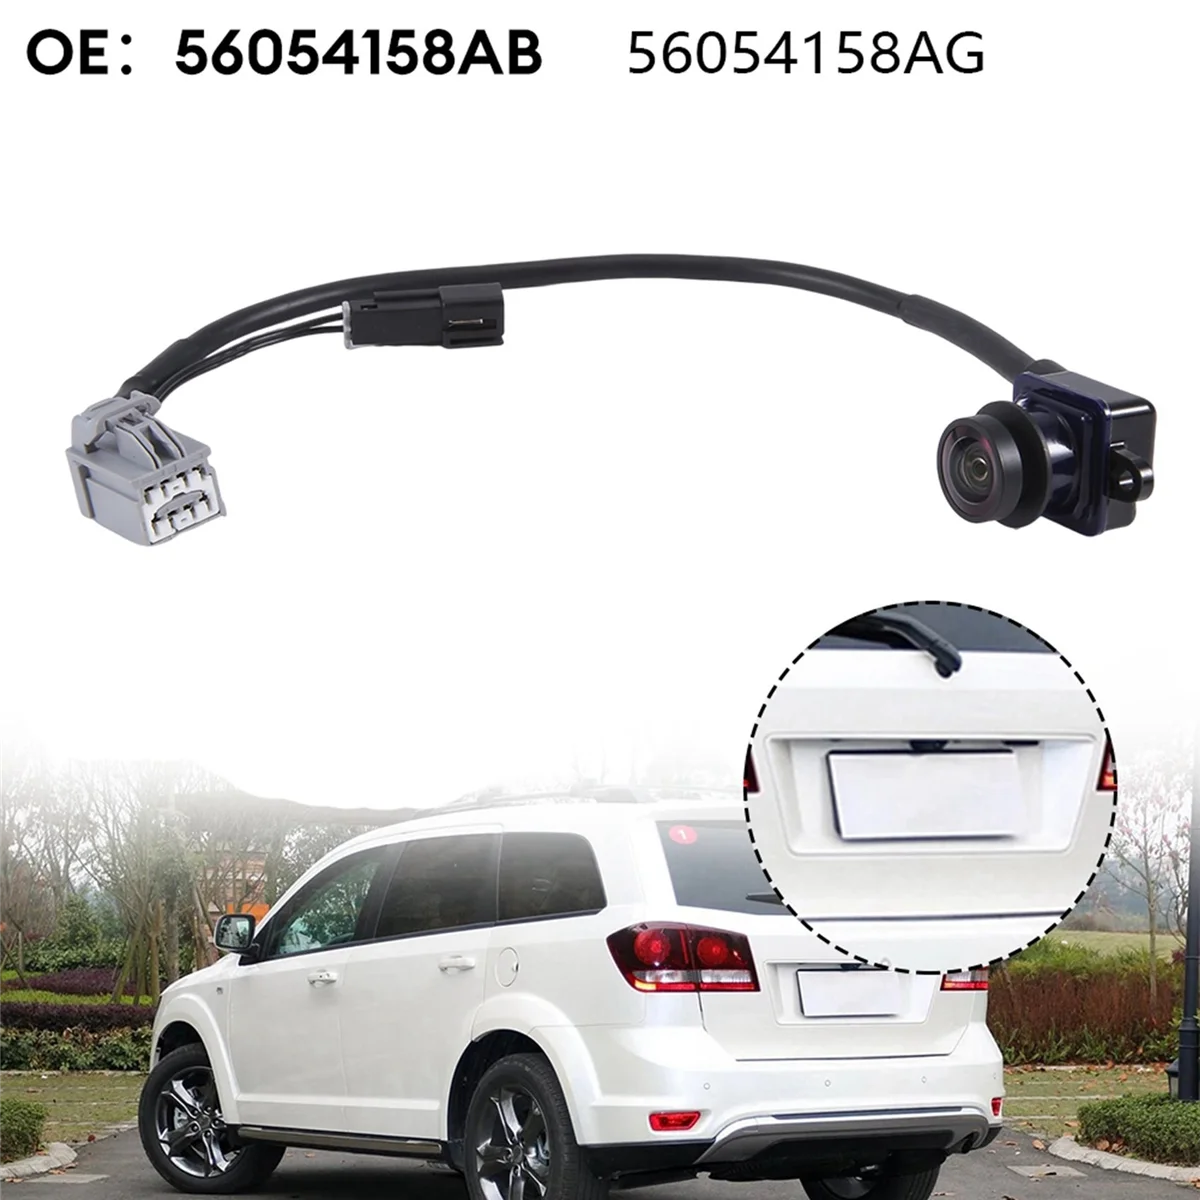 

56054158AG Rear View Camera Backup ist Camera for Dodge Journey 2011-2020 56054158AB